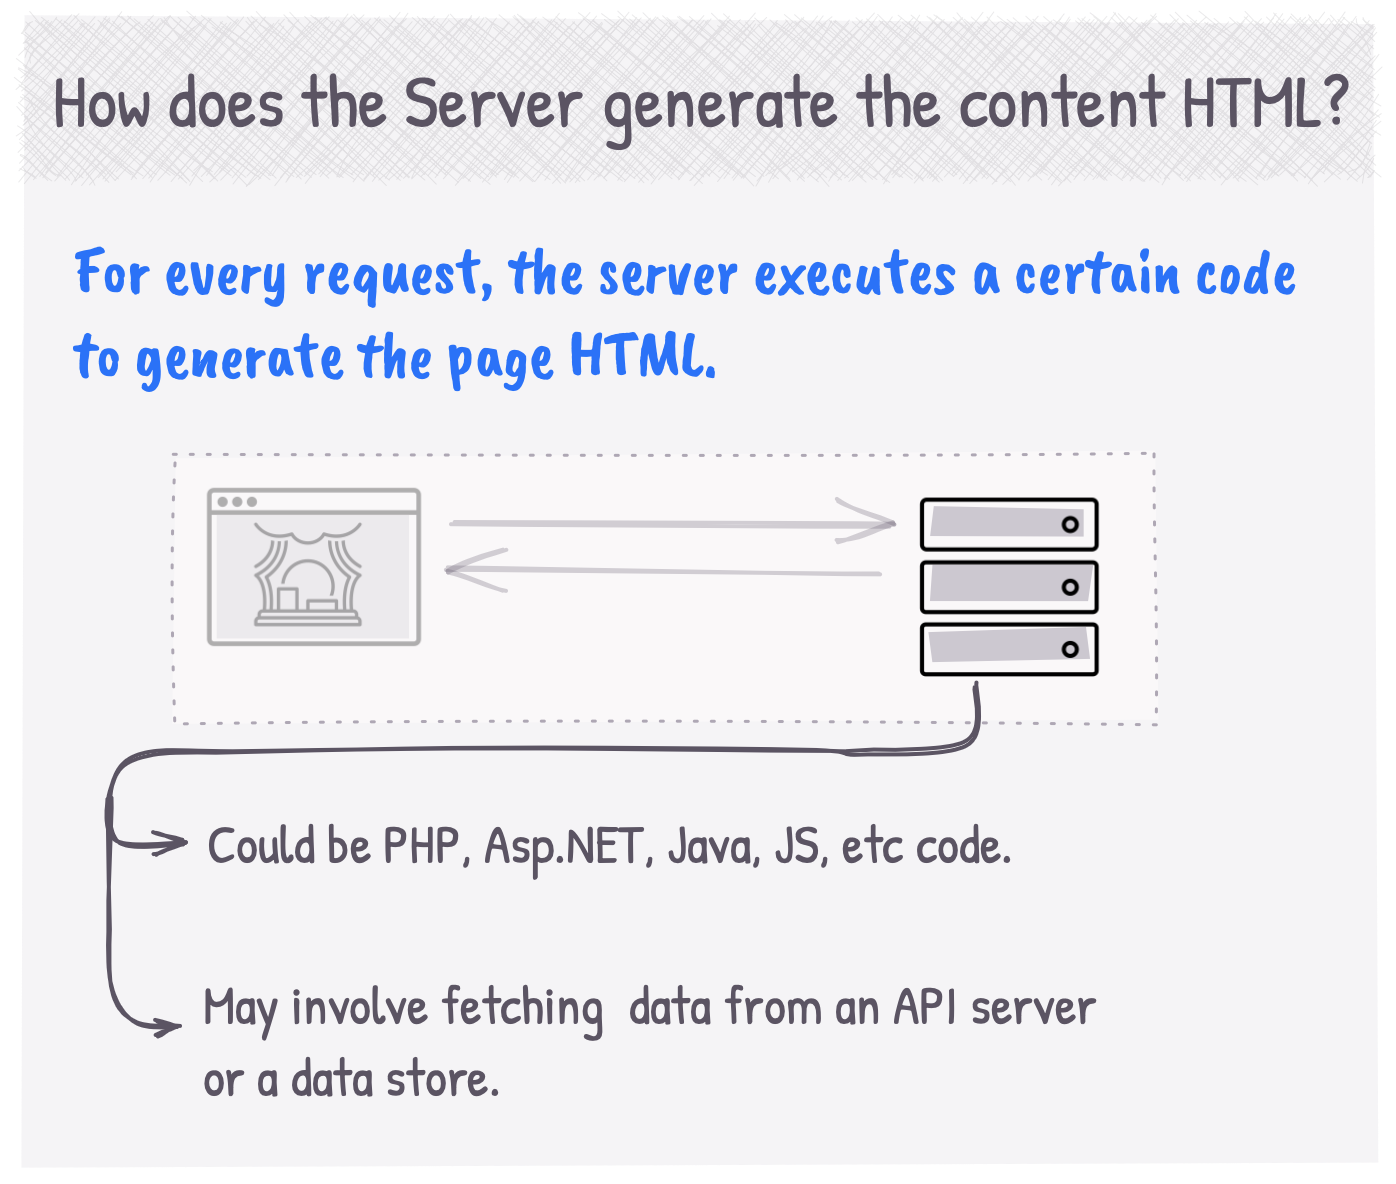 How does the server generate the content HTML?